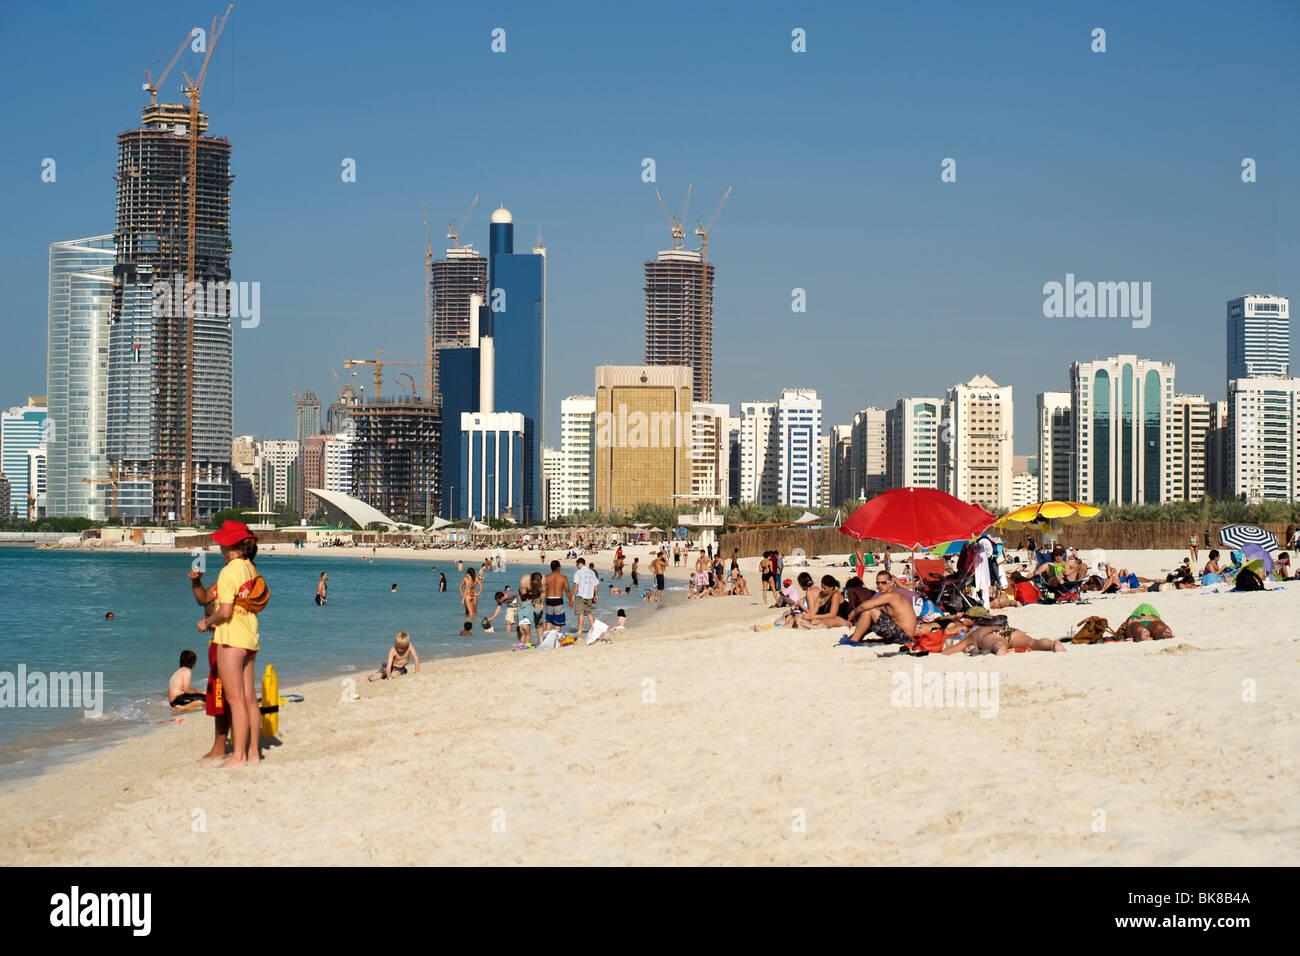 The beachfront and buildings in Abu Dhabi in the United Arab Emirates. Stock Photo